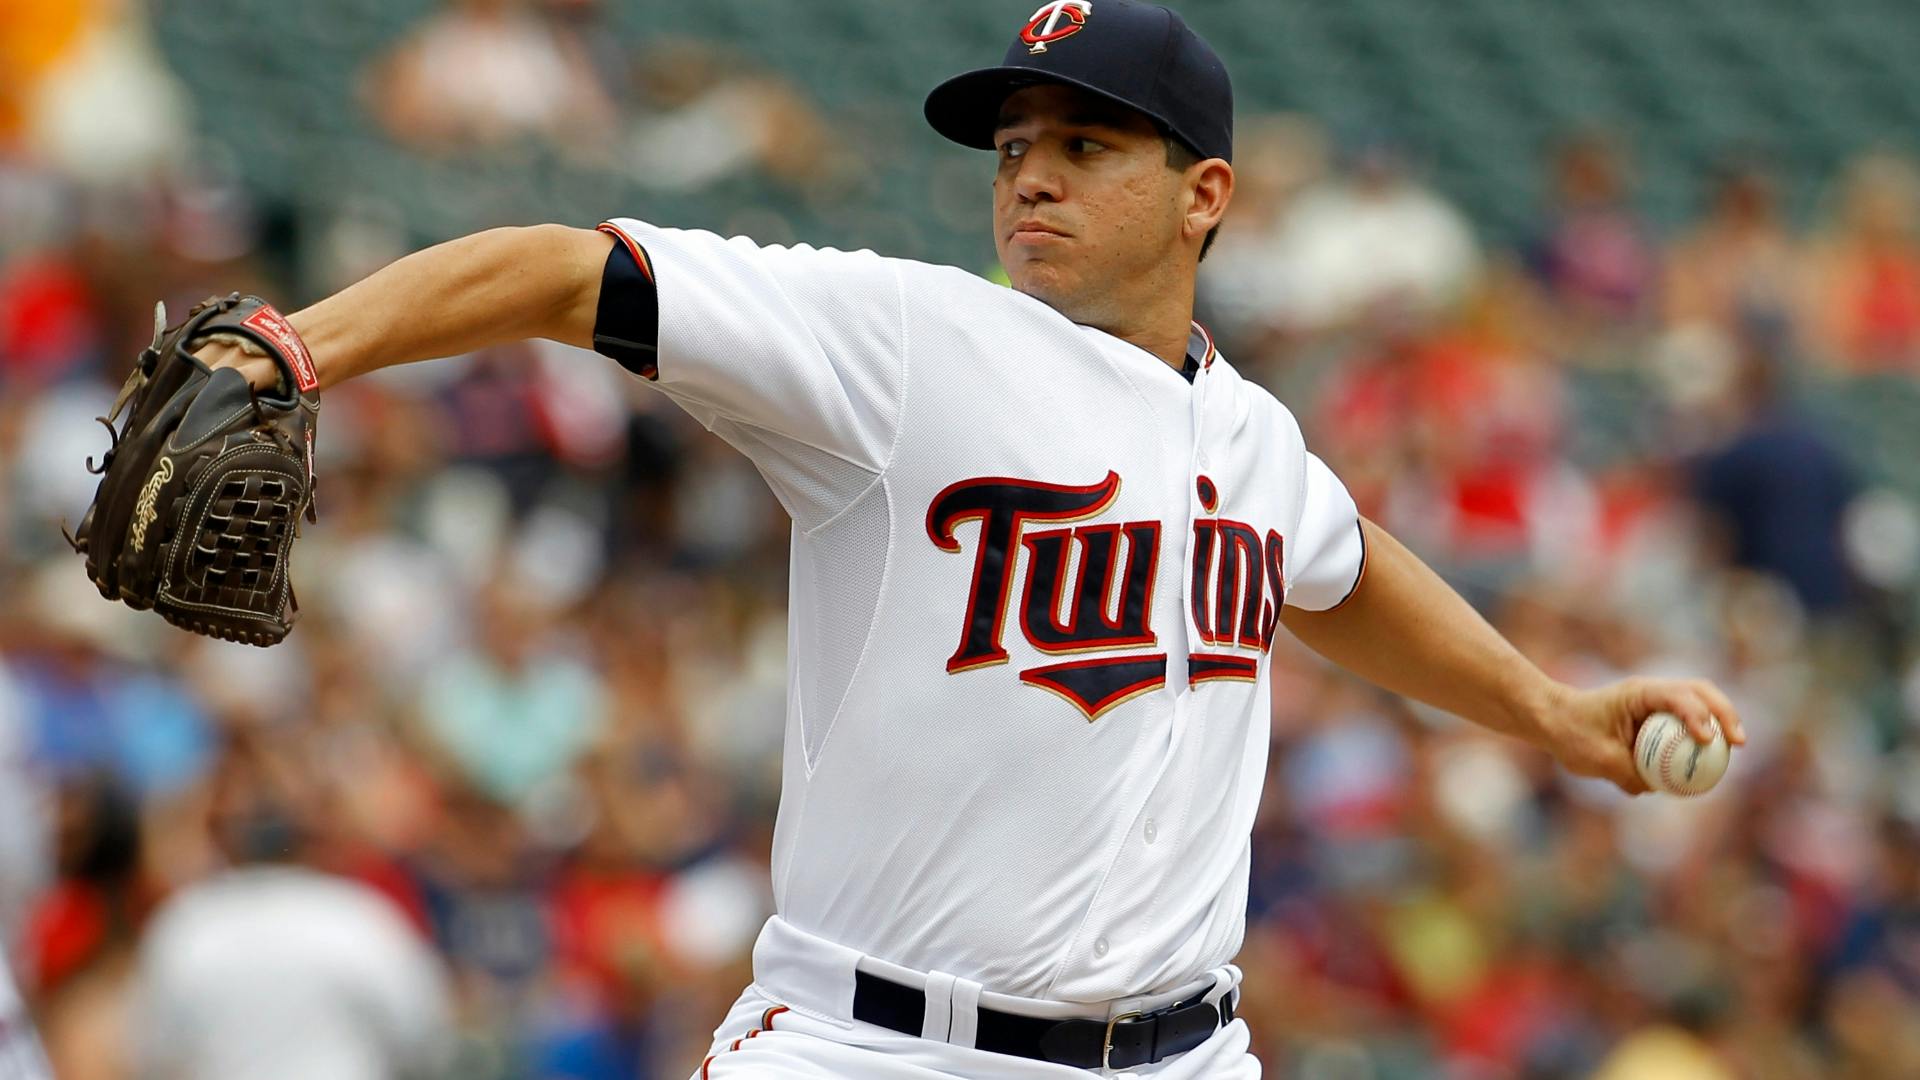 Twins lefthander Tommy Milone dominated White Sox on Wednesday.